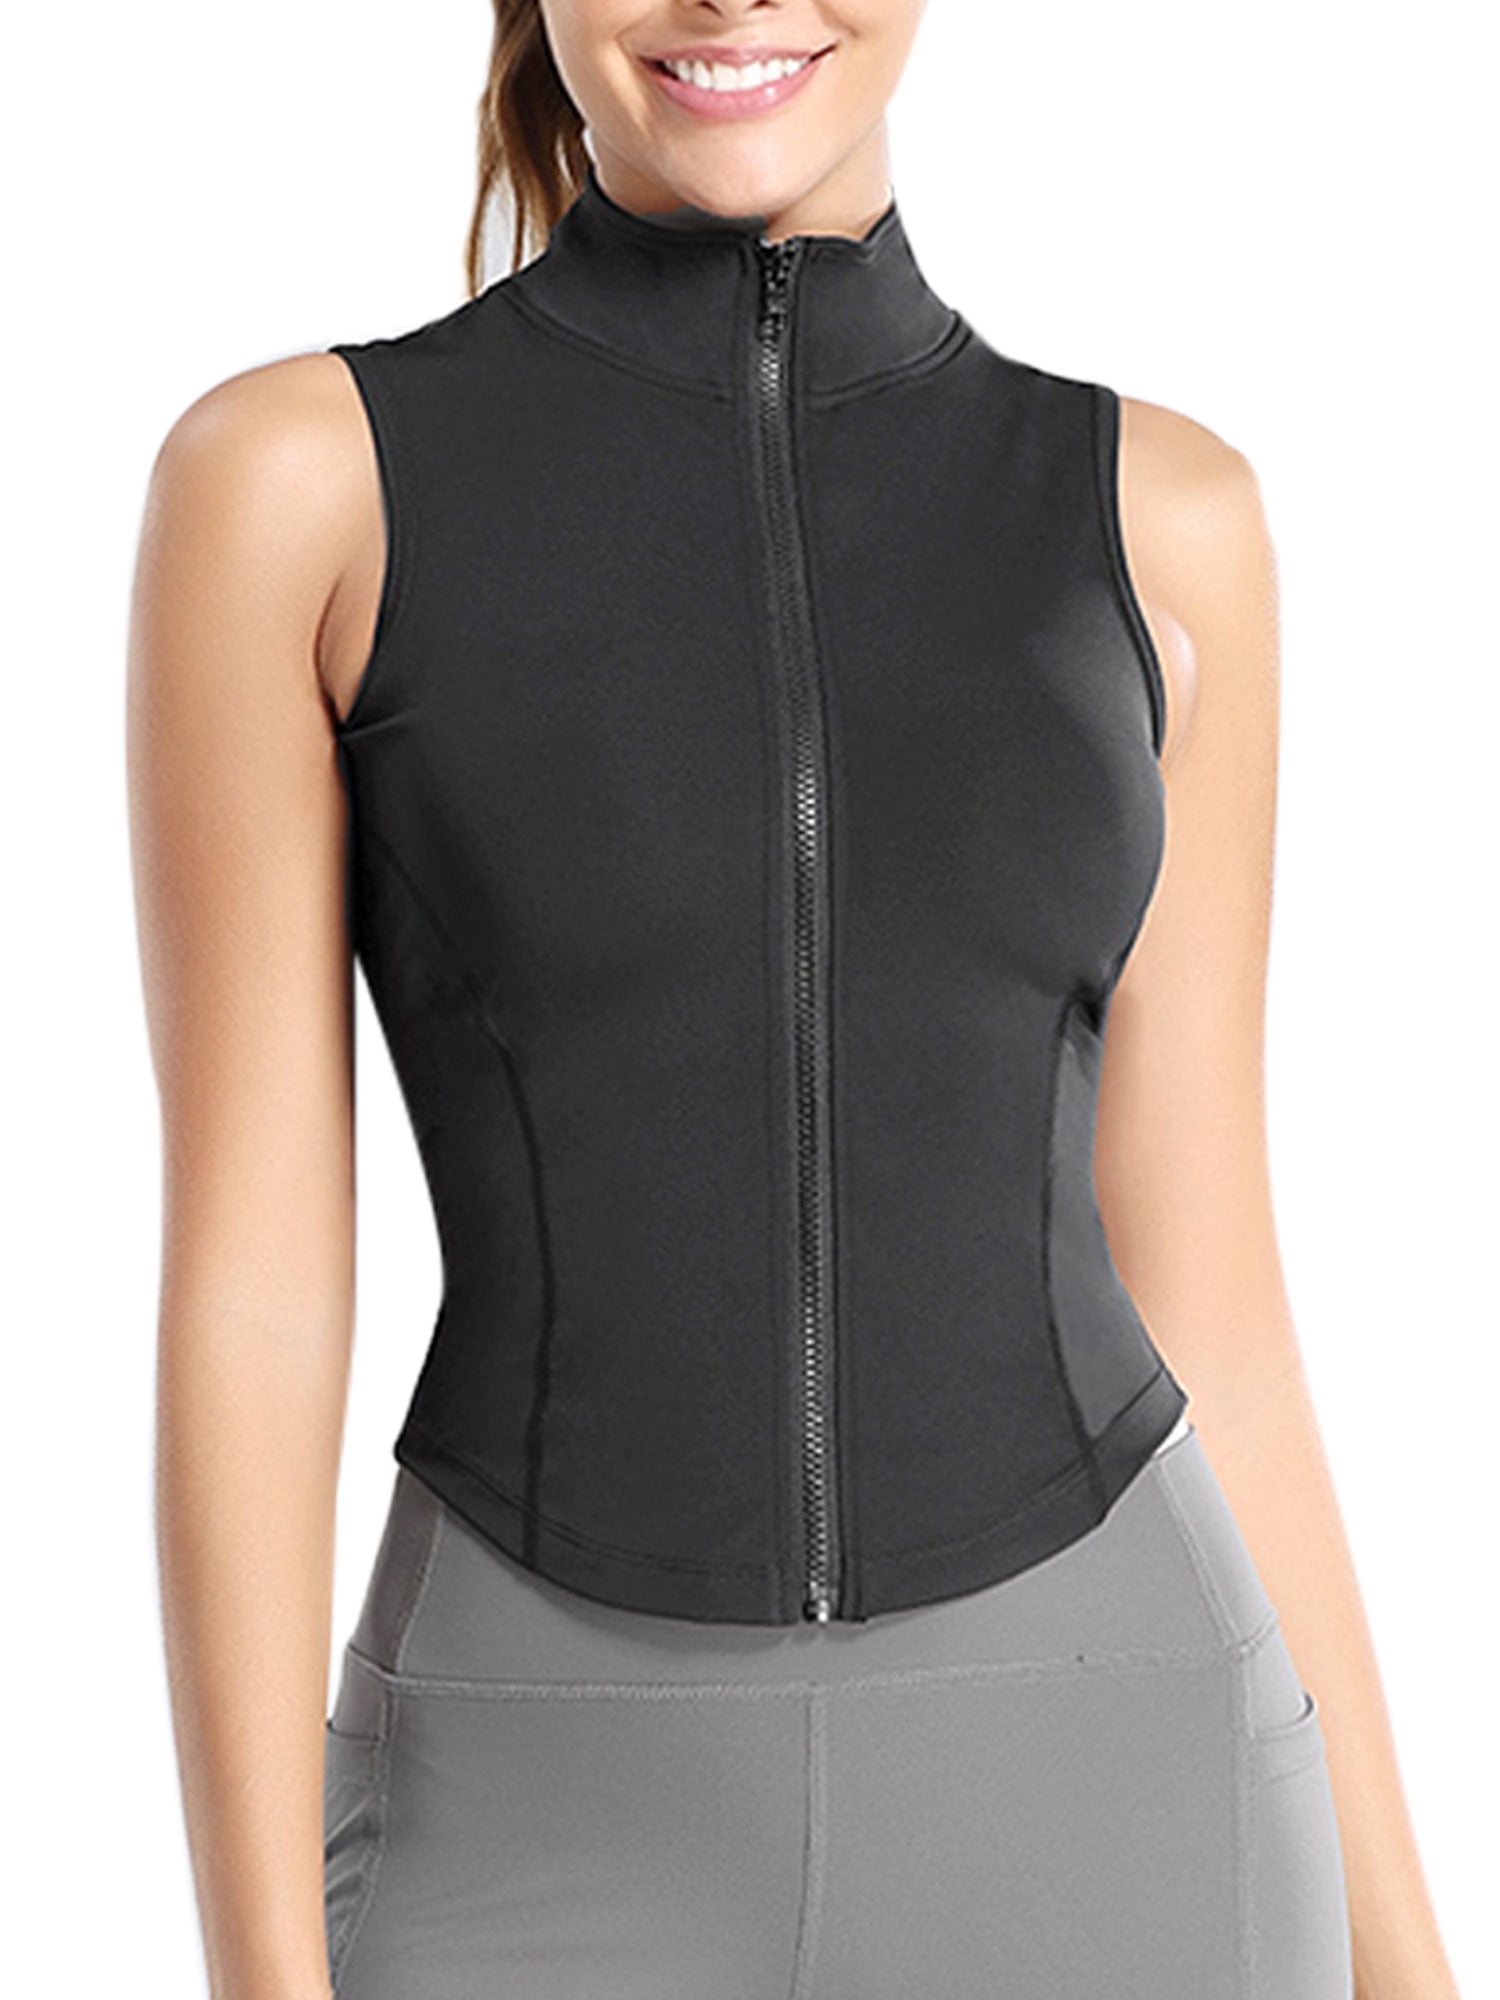 Workout Crop Tops for Women Lightweight Full Zip Athletic Yoga Shirts Slim Fit Jacket Running Workout Sports Crop Tops